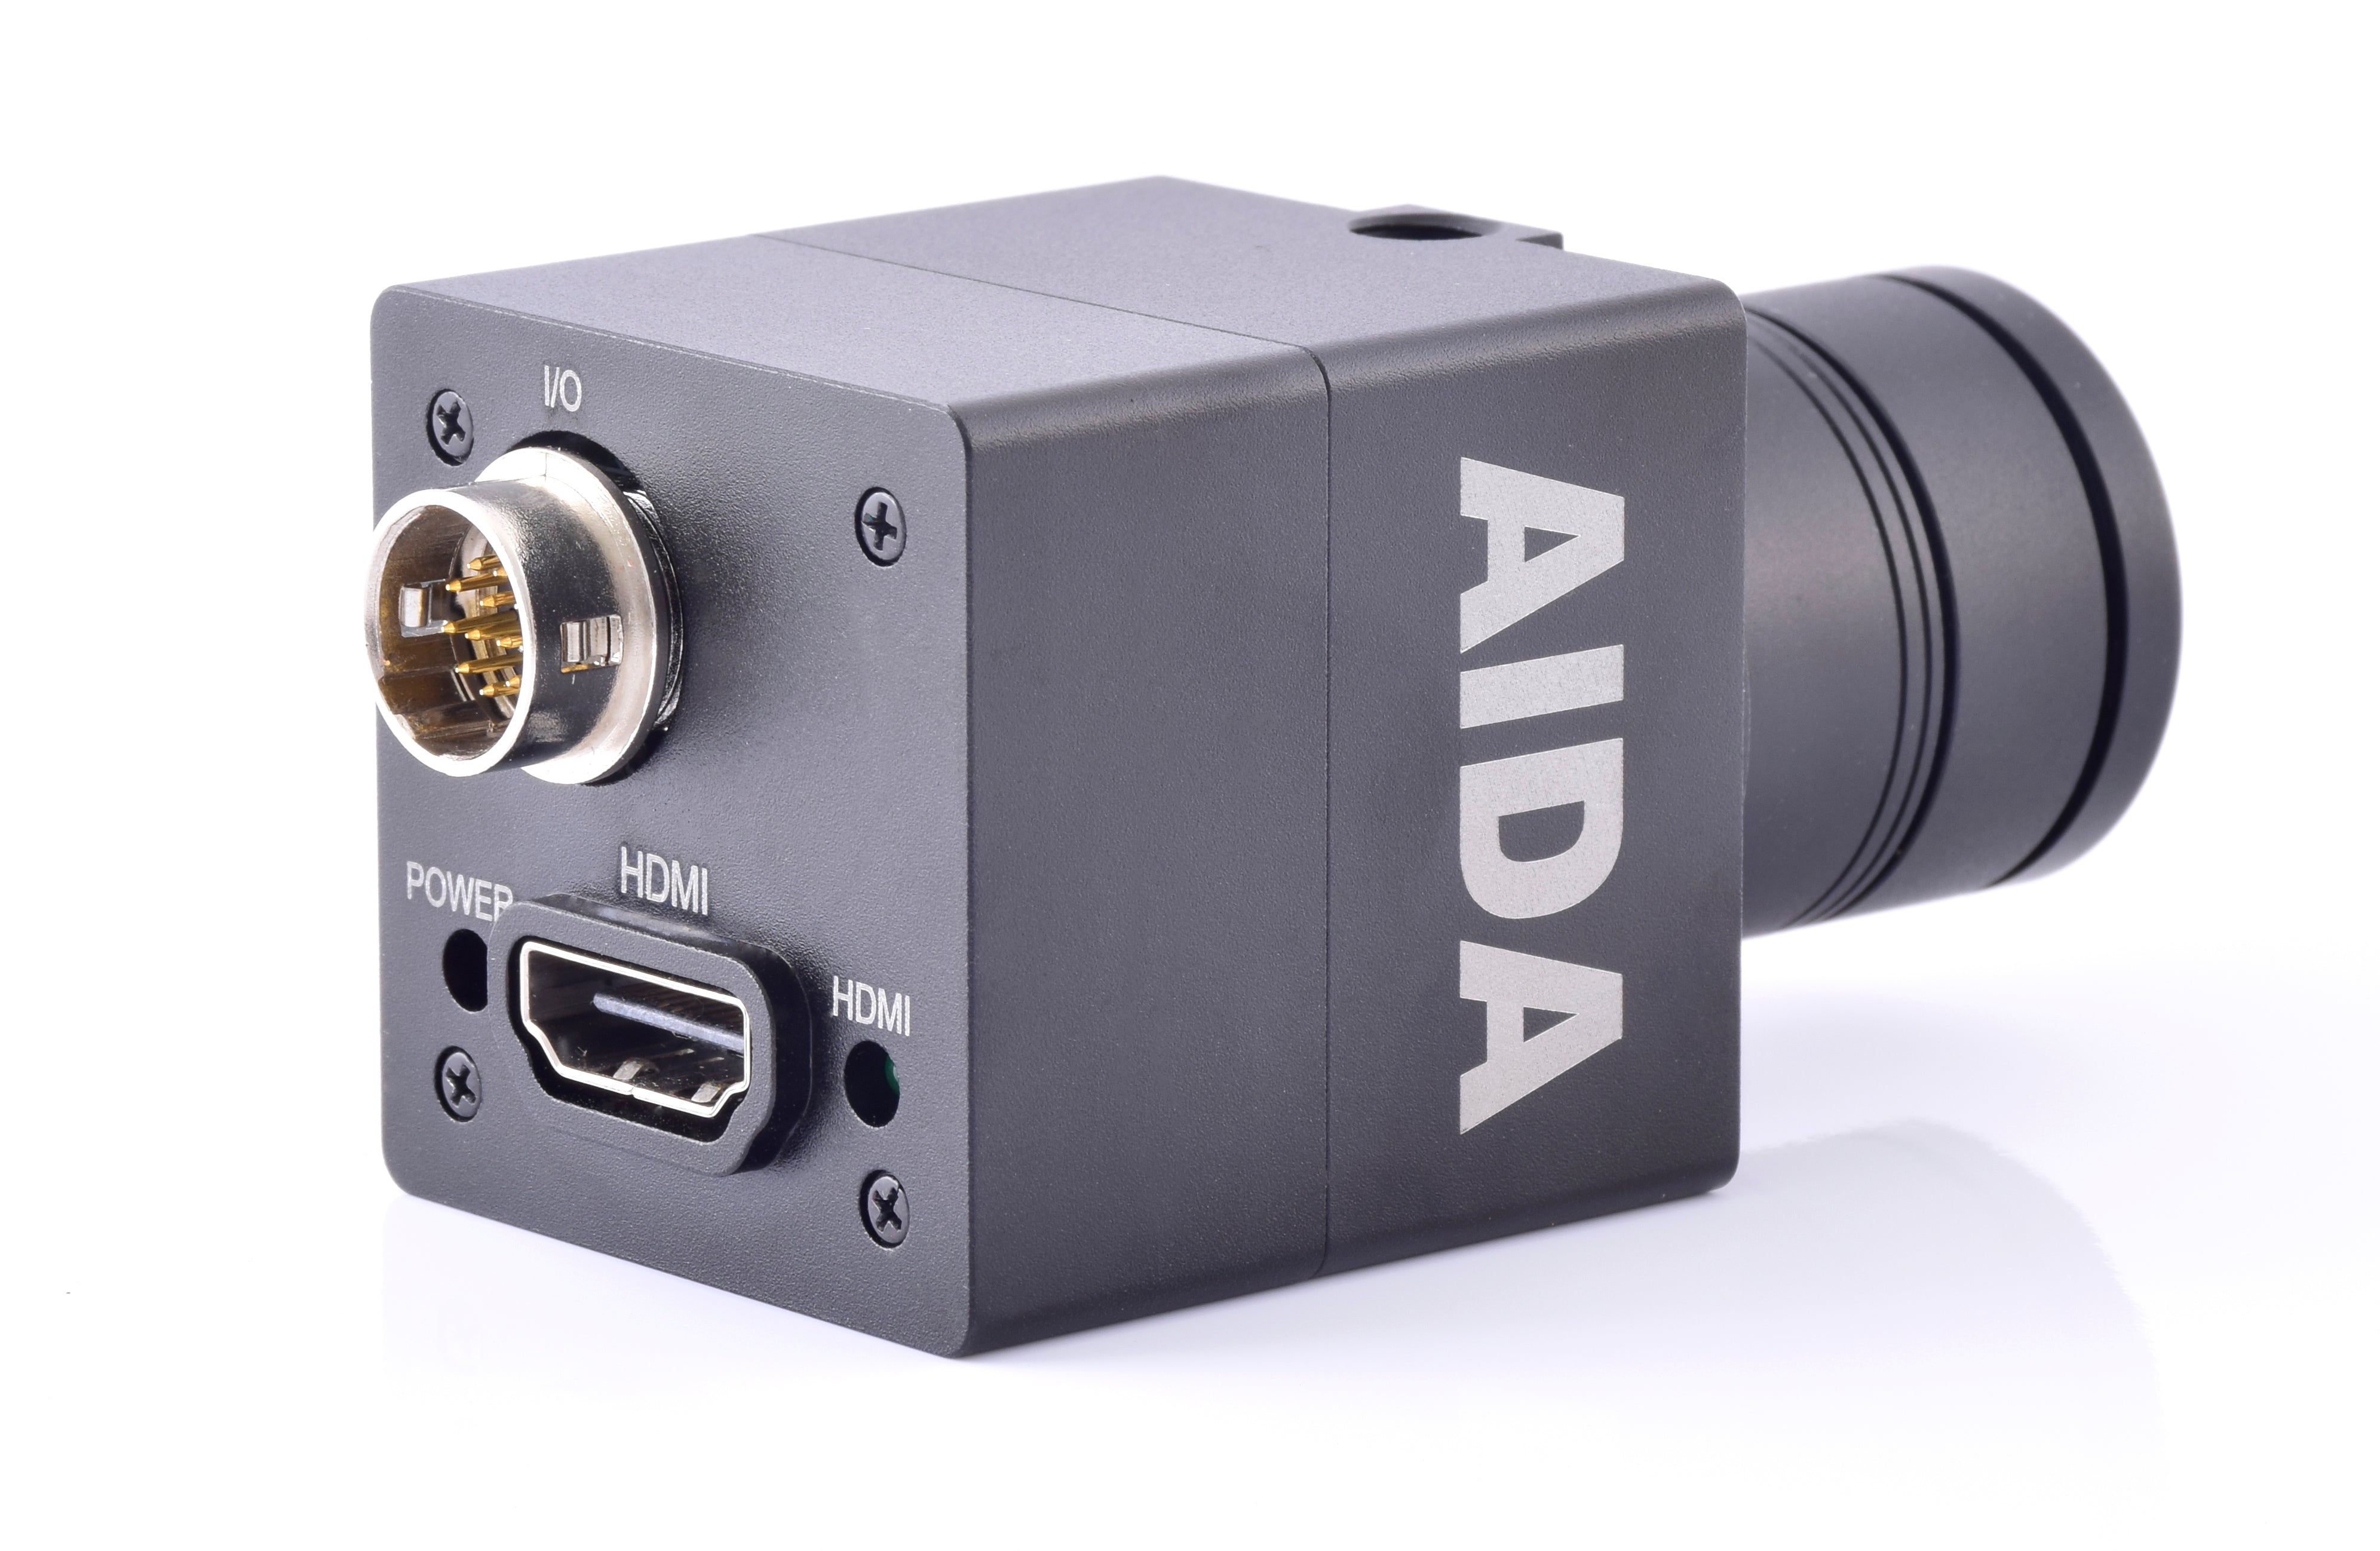 AIDA Imaging Micro UHD 4K HDMI POV Camera with TRS Stereo Audio Input in a Back-Side View